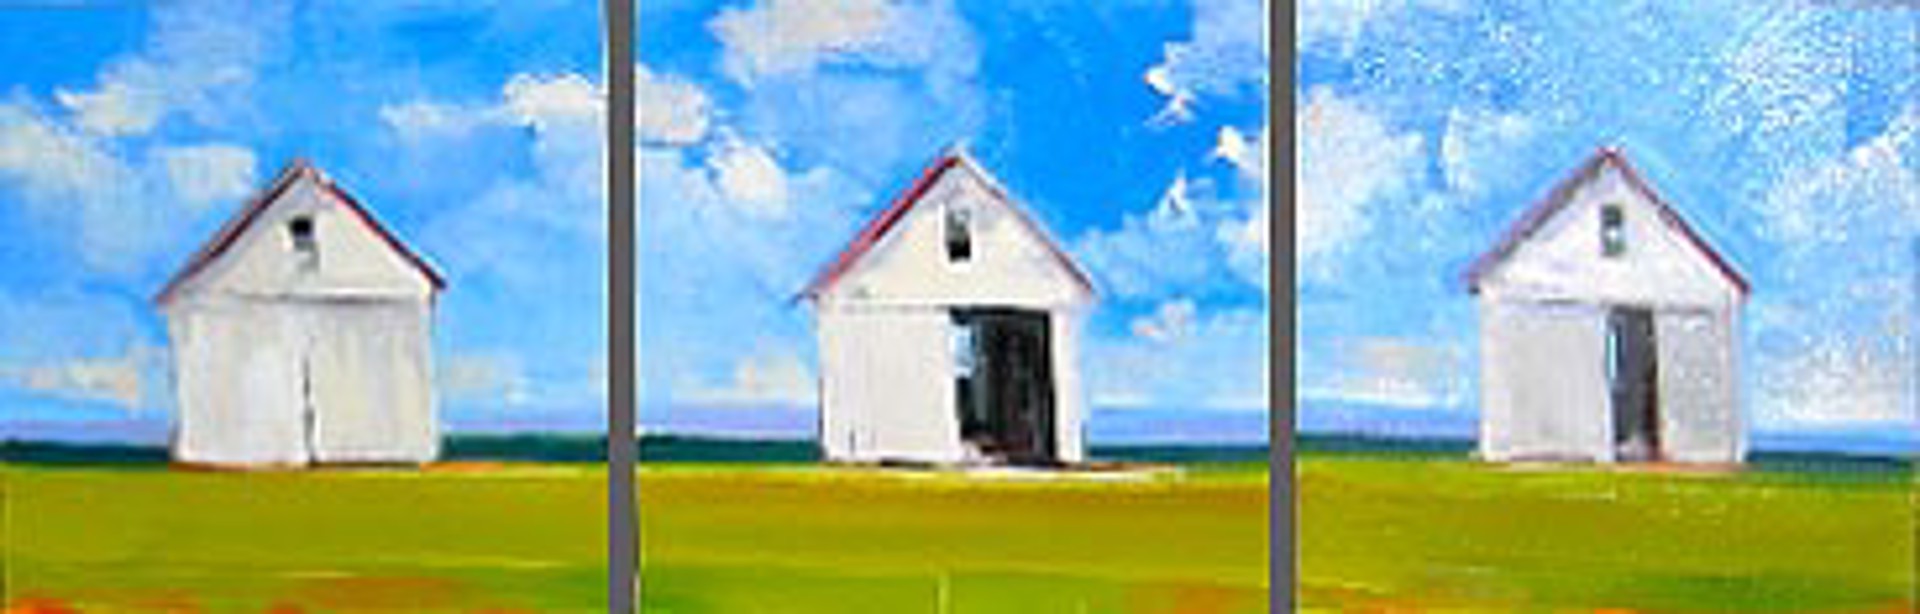 Summer Sheds Triptych by Craig Mooney